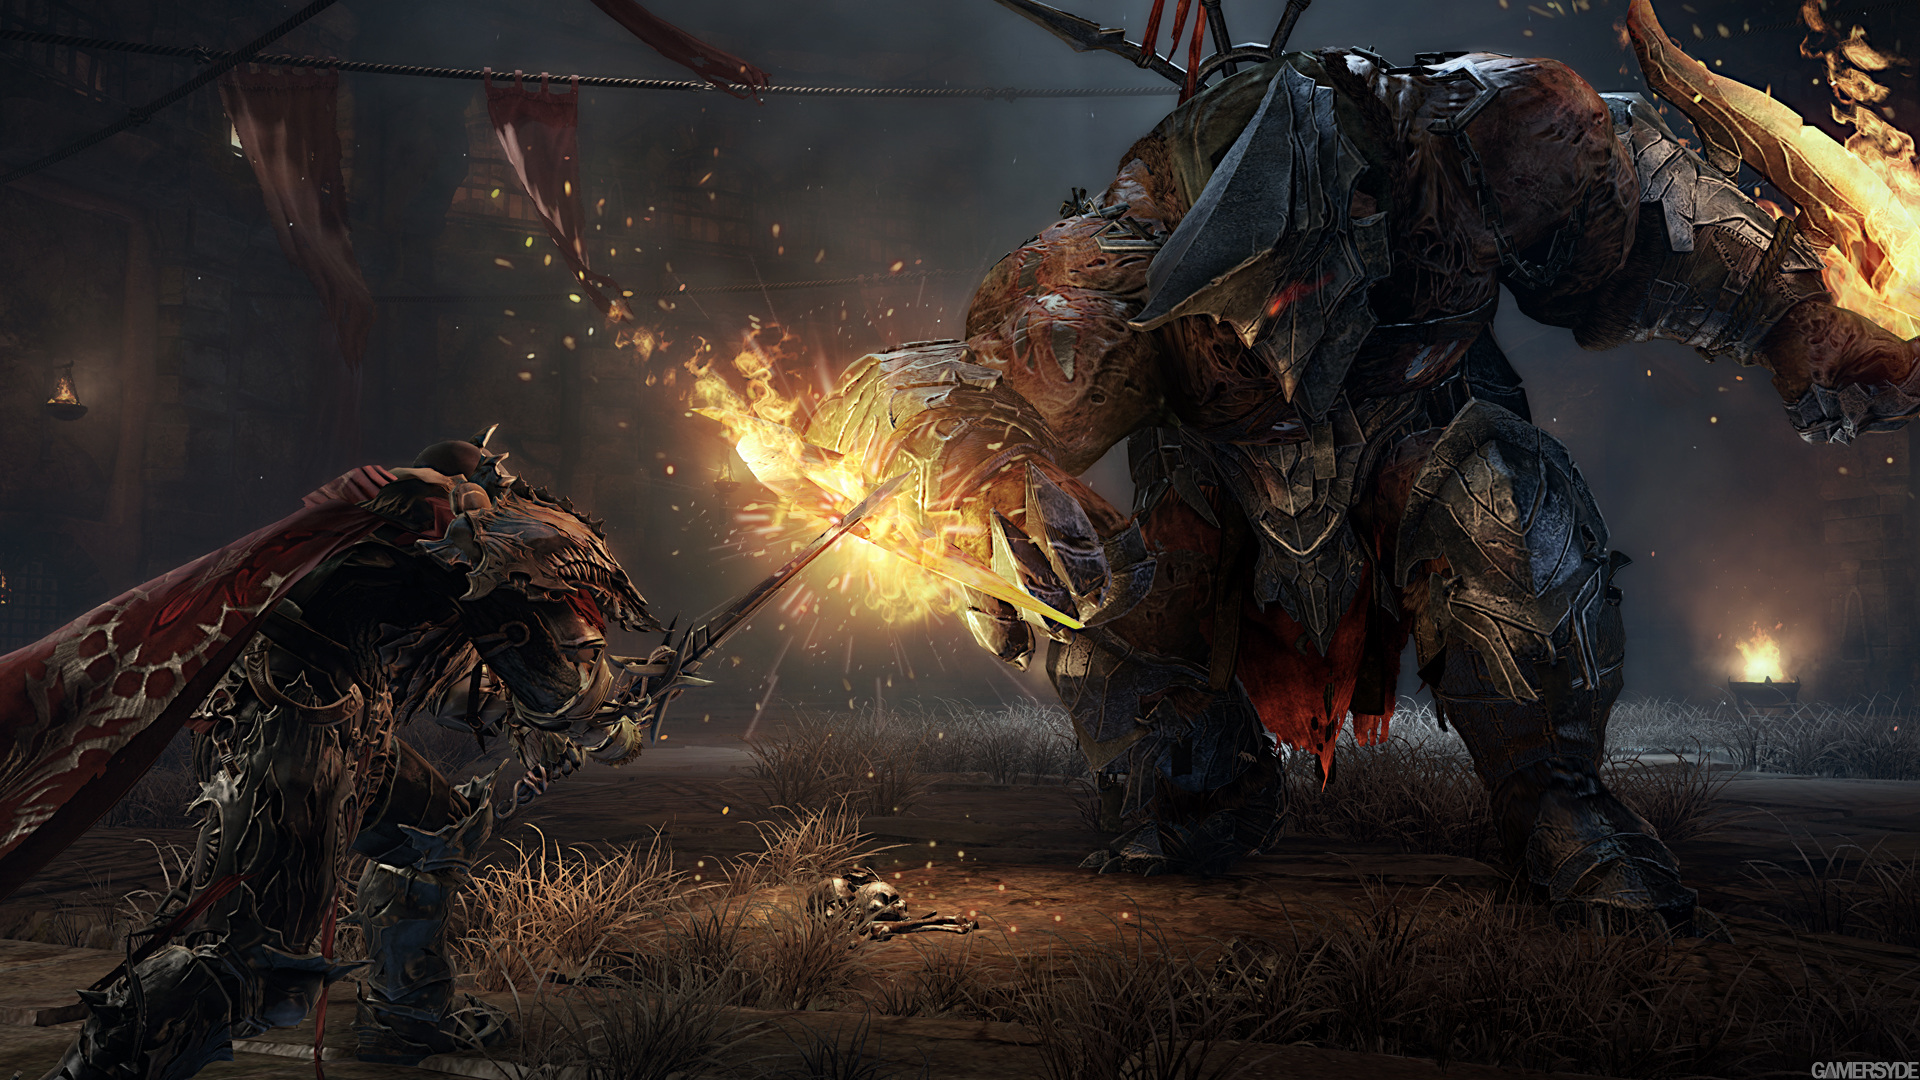 Lords of the Fallen: Gameplay video - Gamersyde